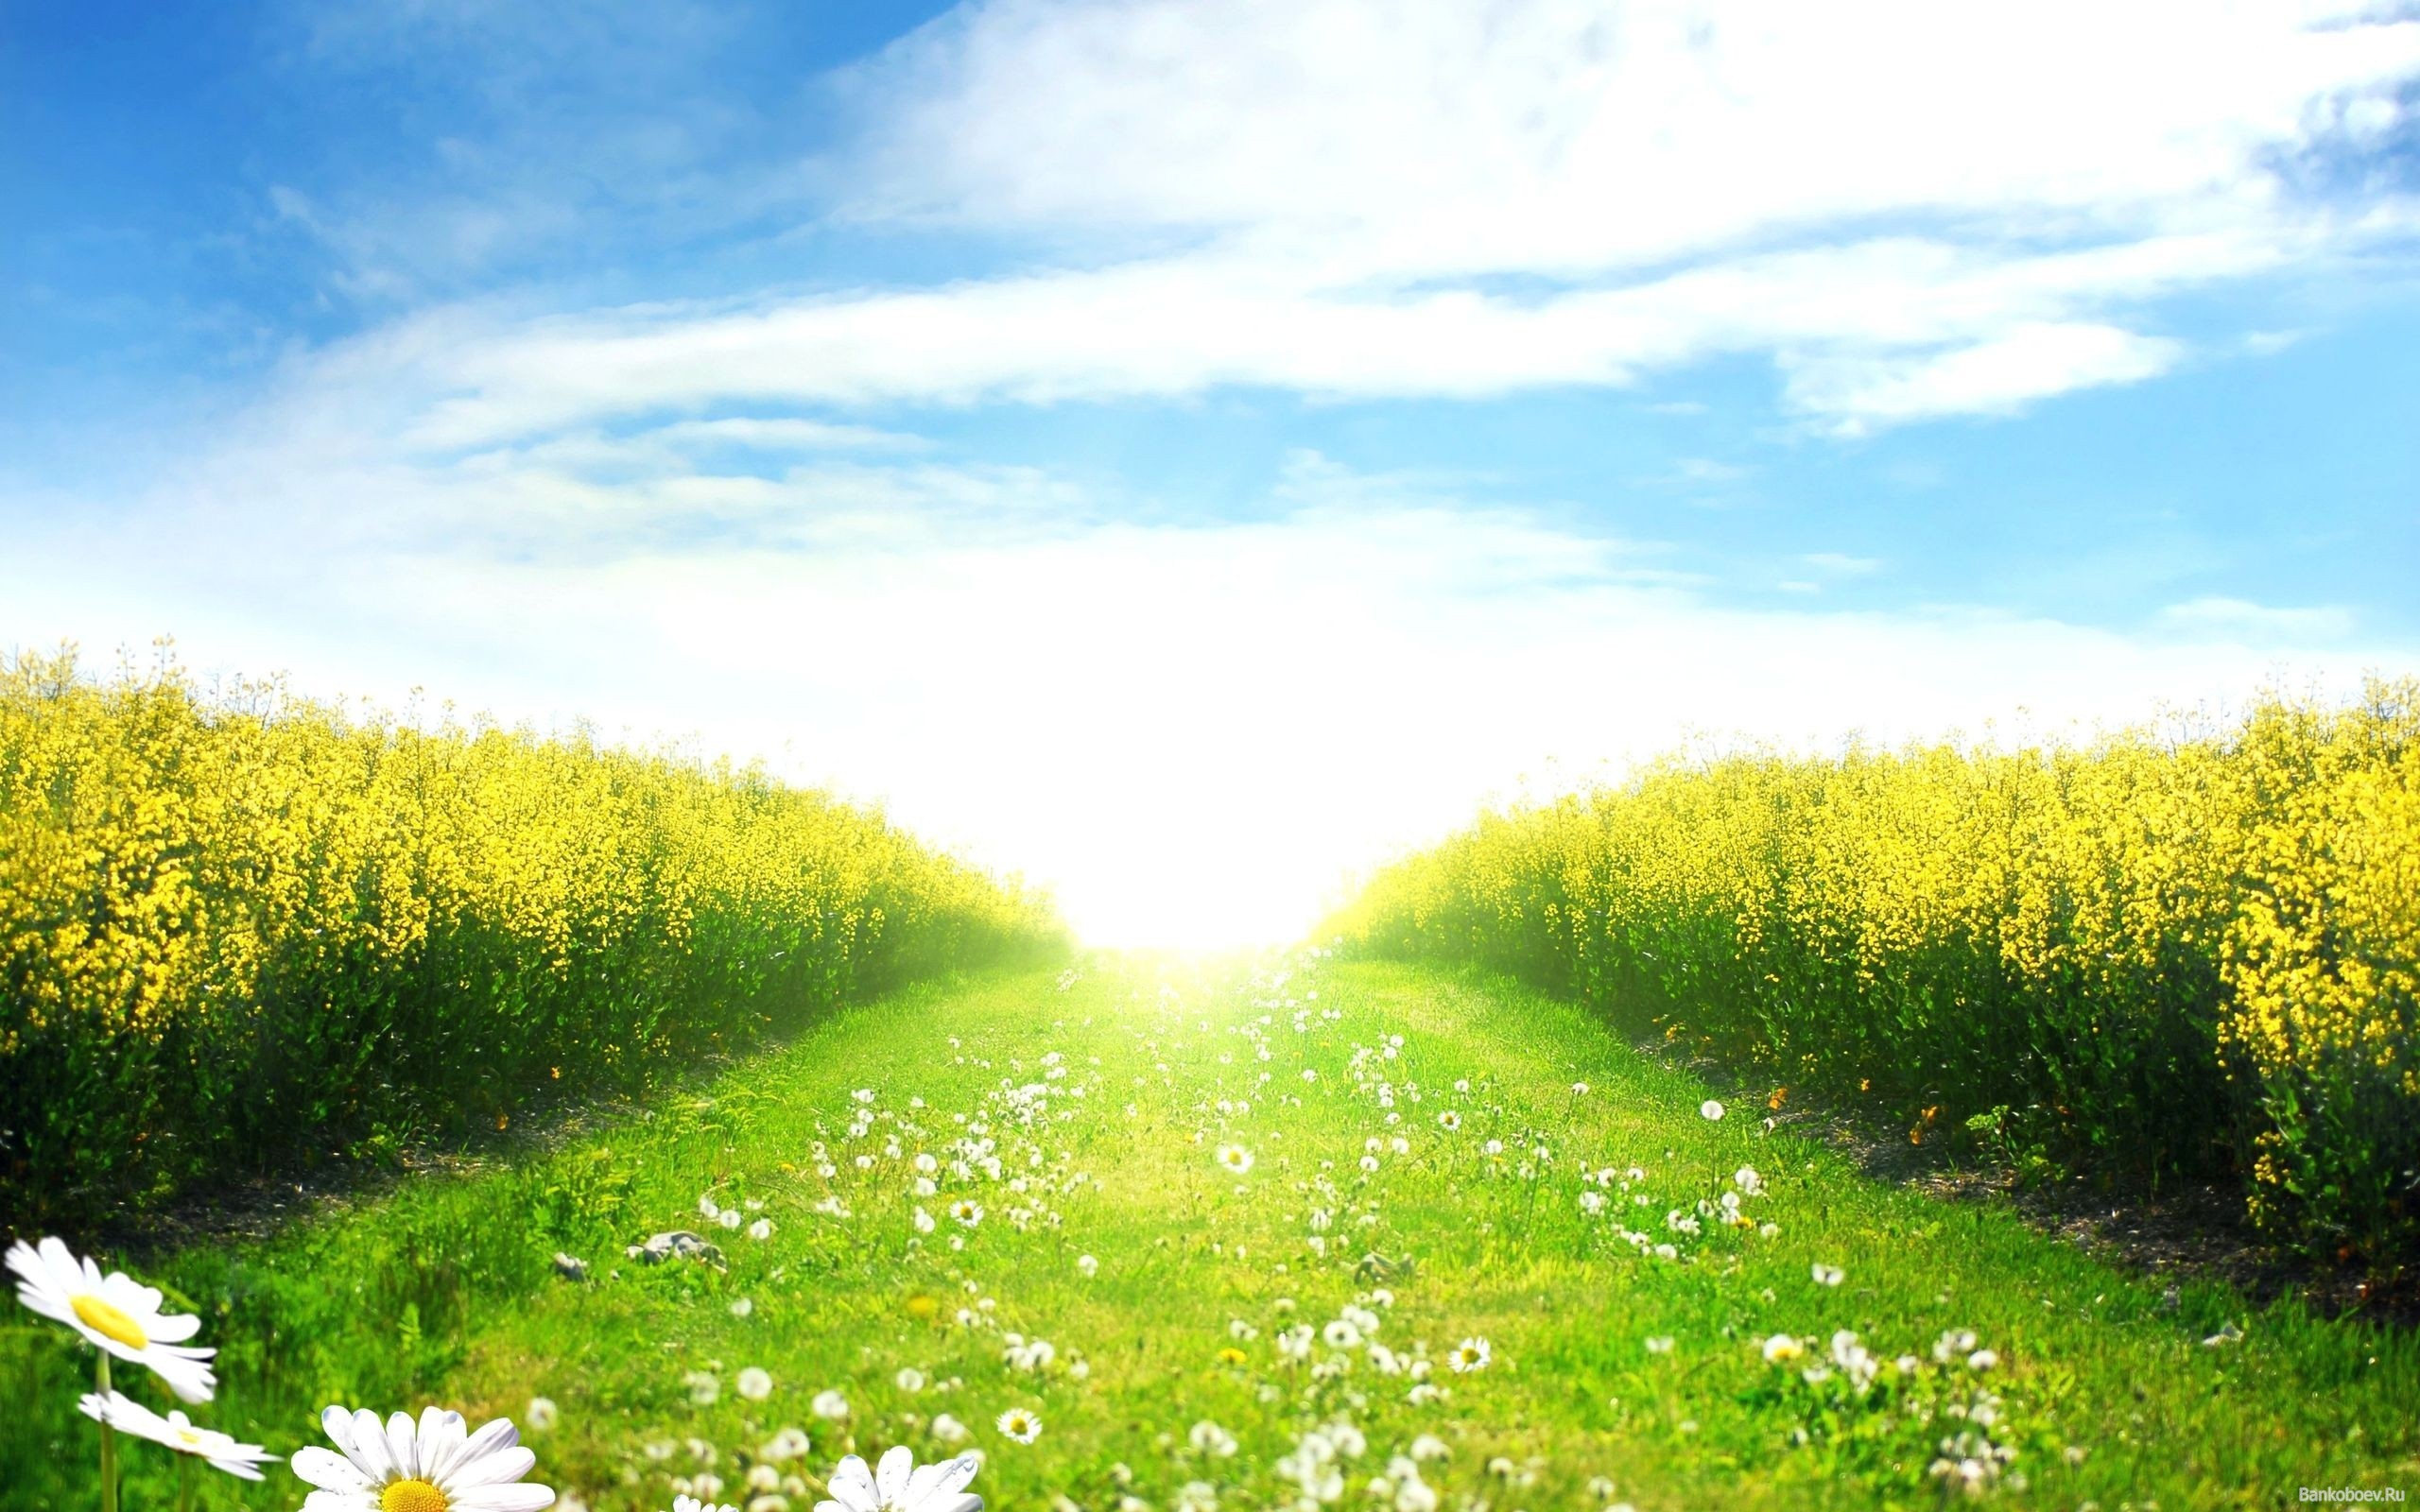 Sunny Day In The Spring Field Wallpaper And Image